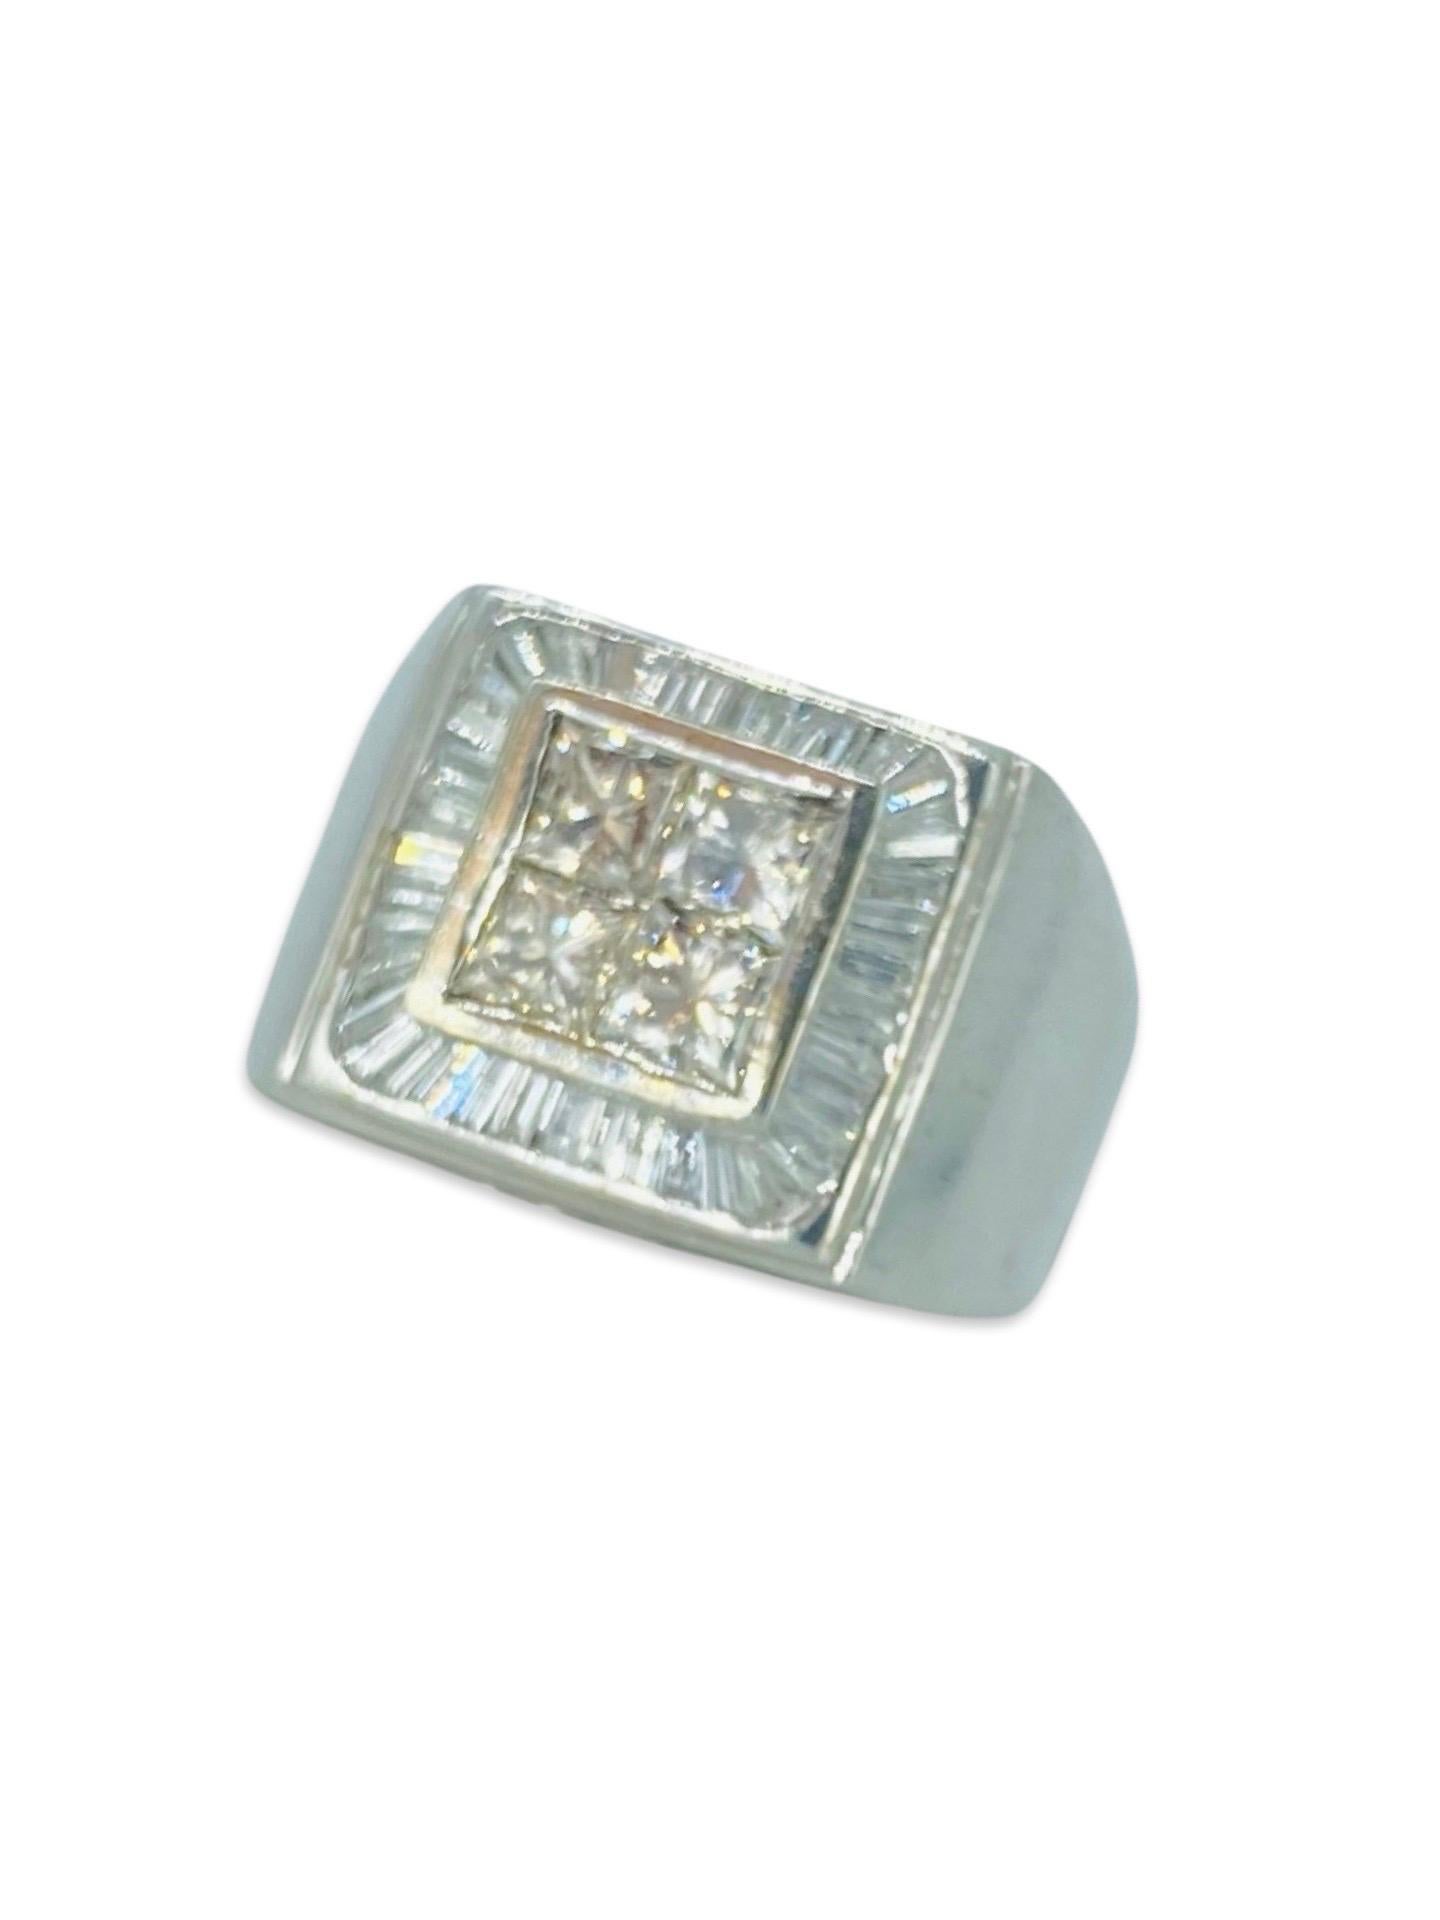 Modern Men’s 1.50 Carat Fancy Champagne & White Diamonds Ring 14k White Gold: princess cut diamonds total approx 1.32 and white baguette diamonds total approx 0.18tcw for a total of 1.50tcw in natural diamonds. The ring is a size 8.25 and weights